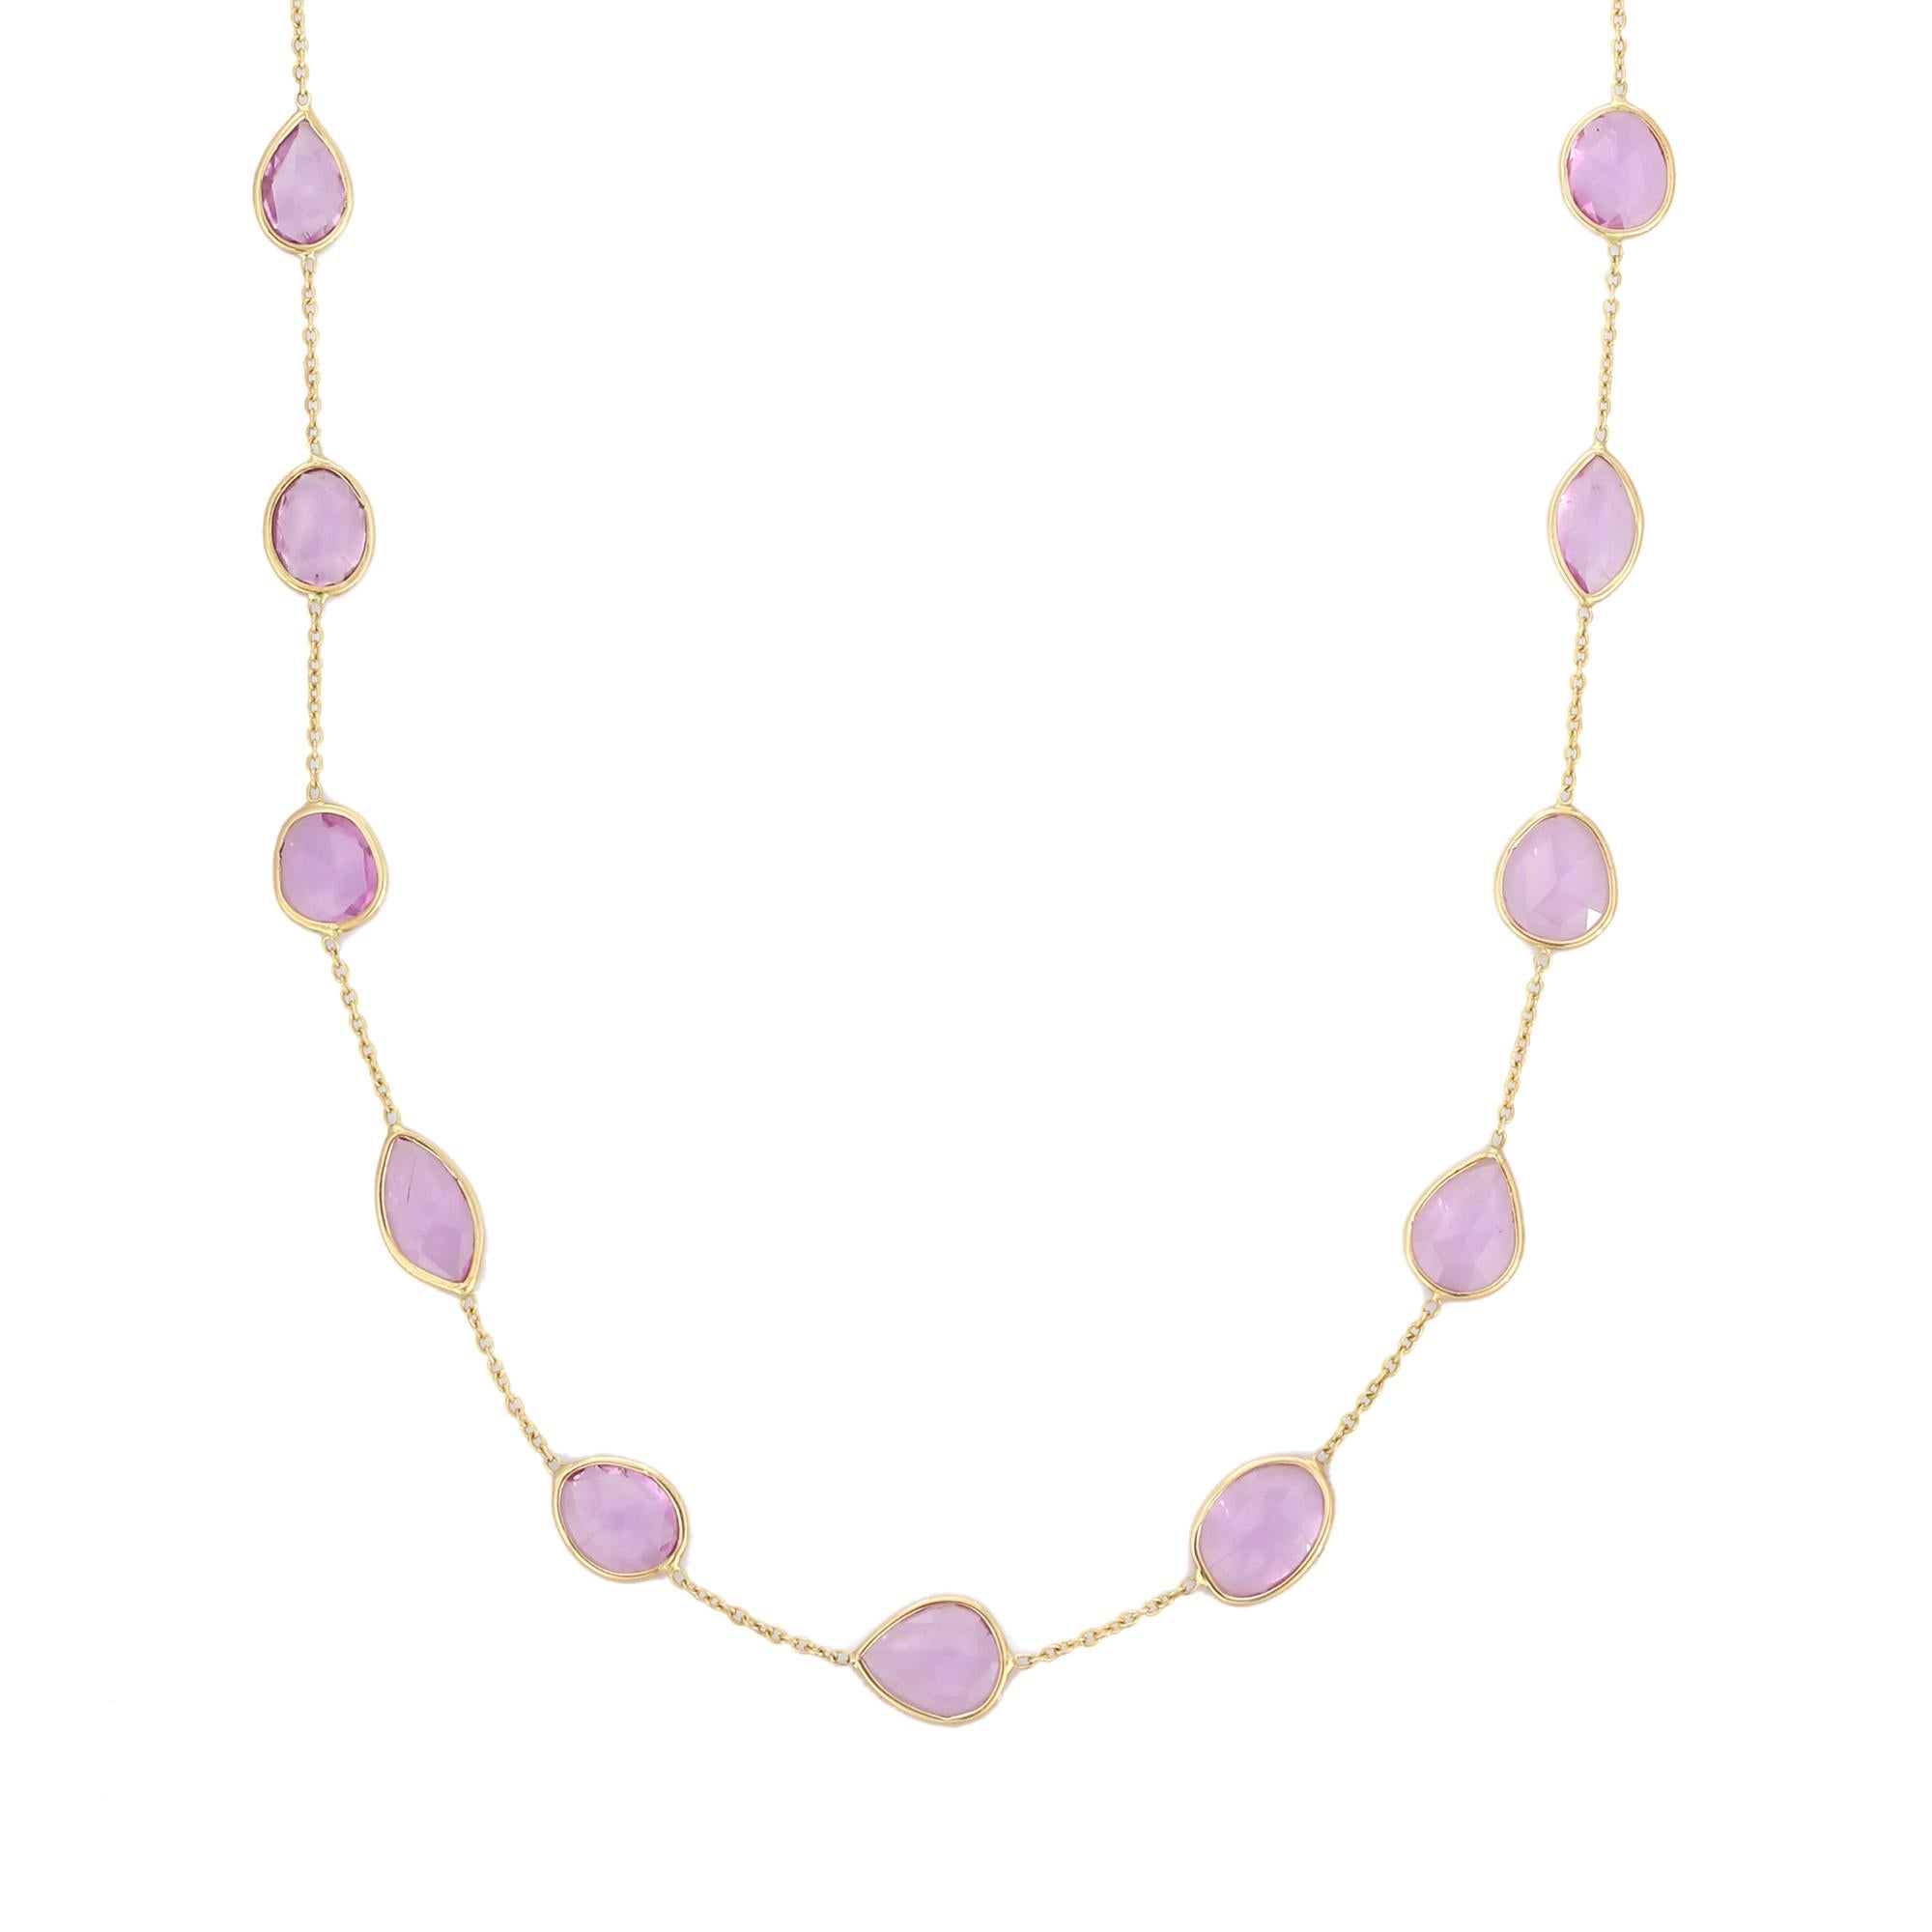 Pink Sapphire Necklace in 18K Gold studded with mix cut sapphire pieces.
Accessorize your look with this elegant pink sapphire chain necklace. This stunning piece of jewelry instantly elevates a casual look or dressy outfit. Comfortable and easy to